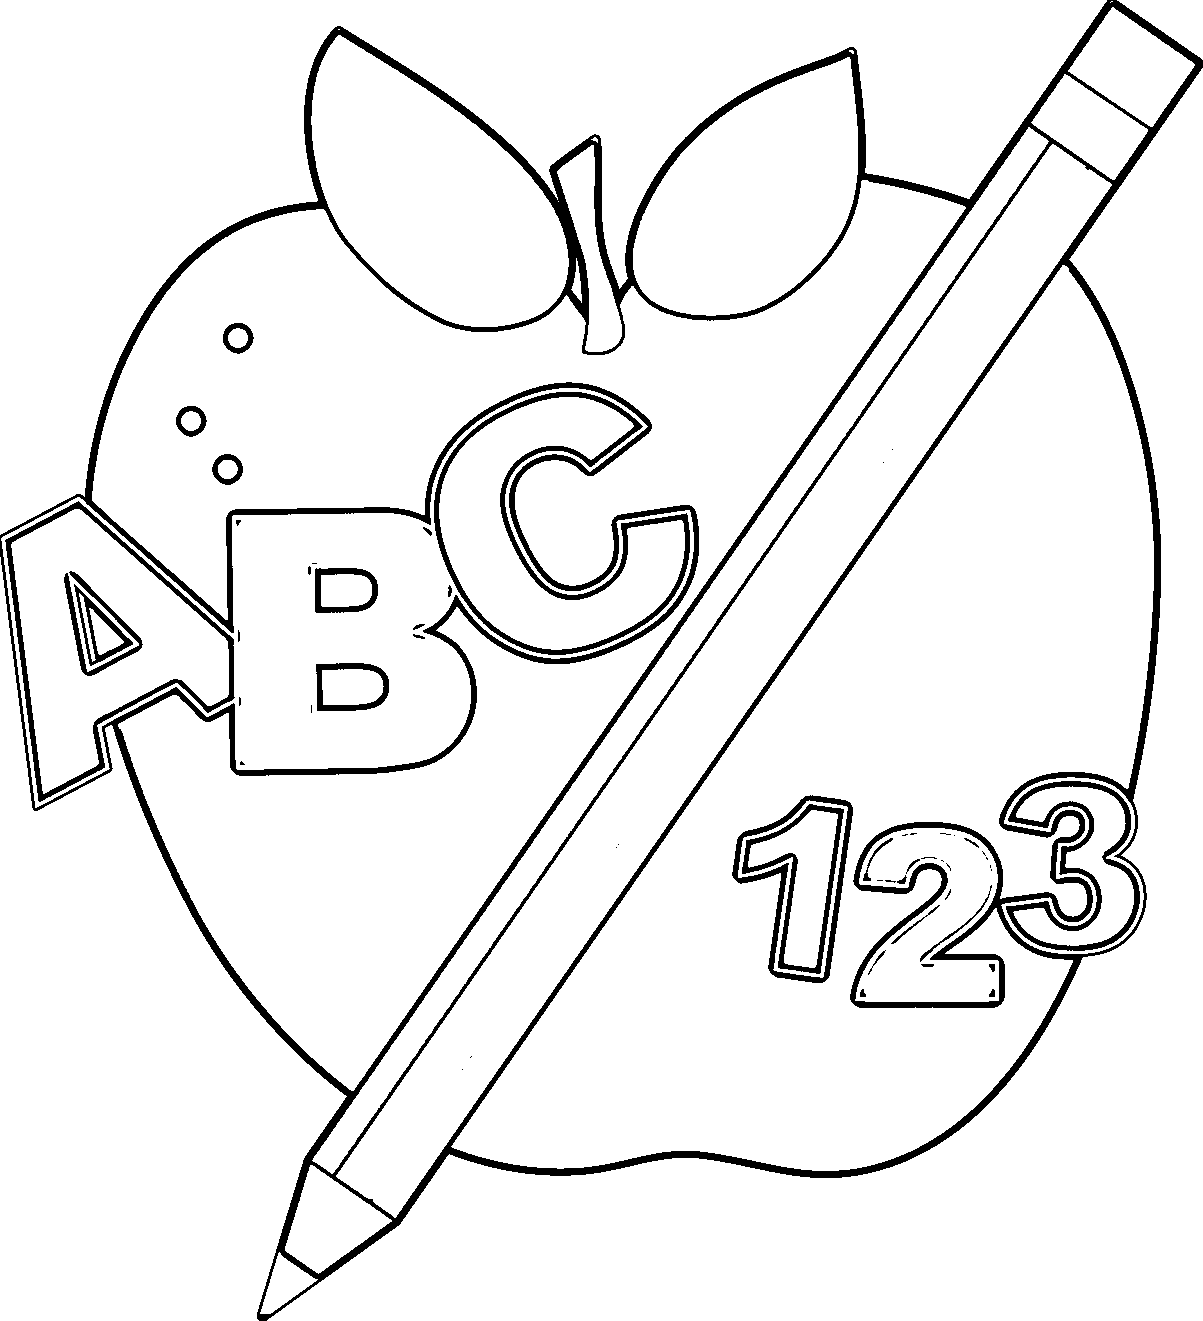 Abc free school related clipart image